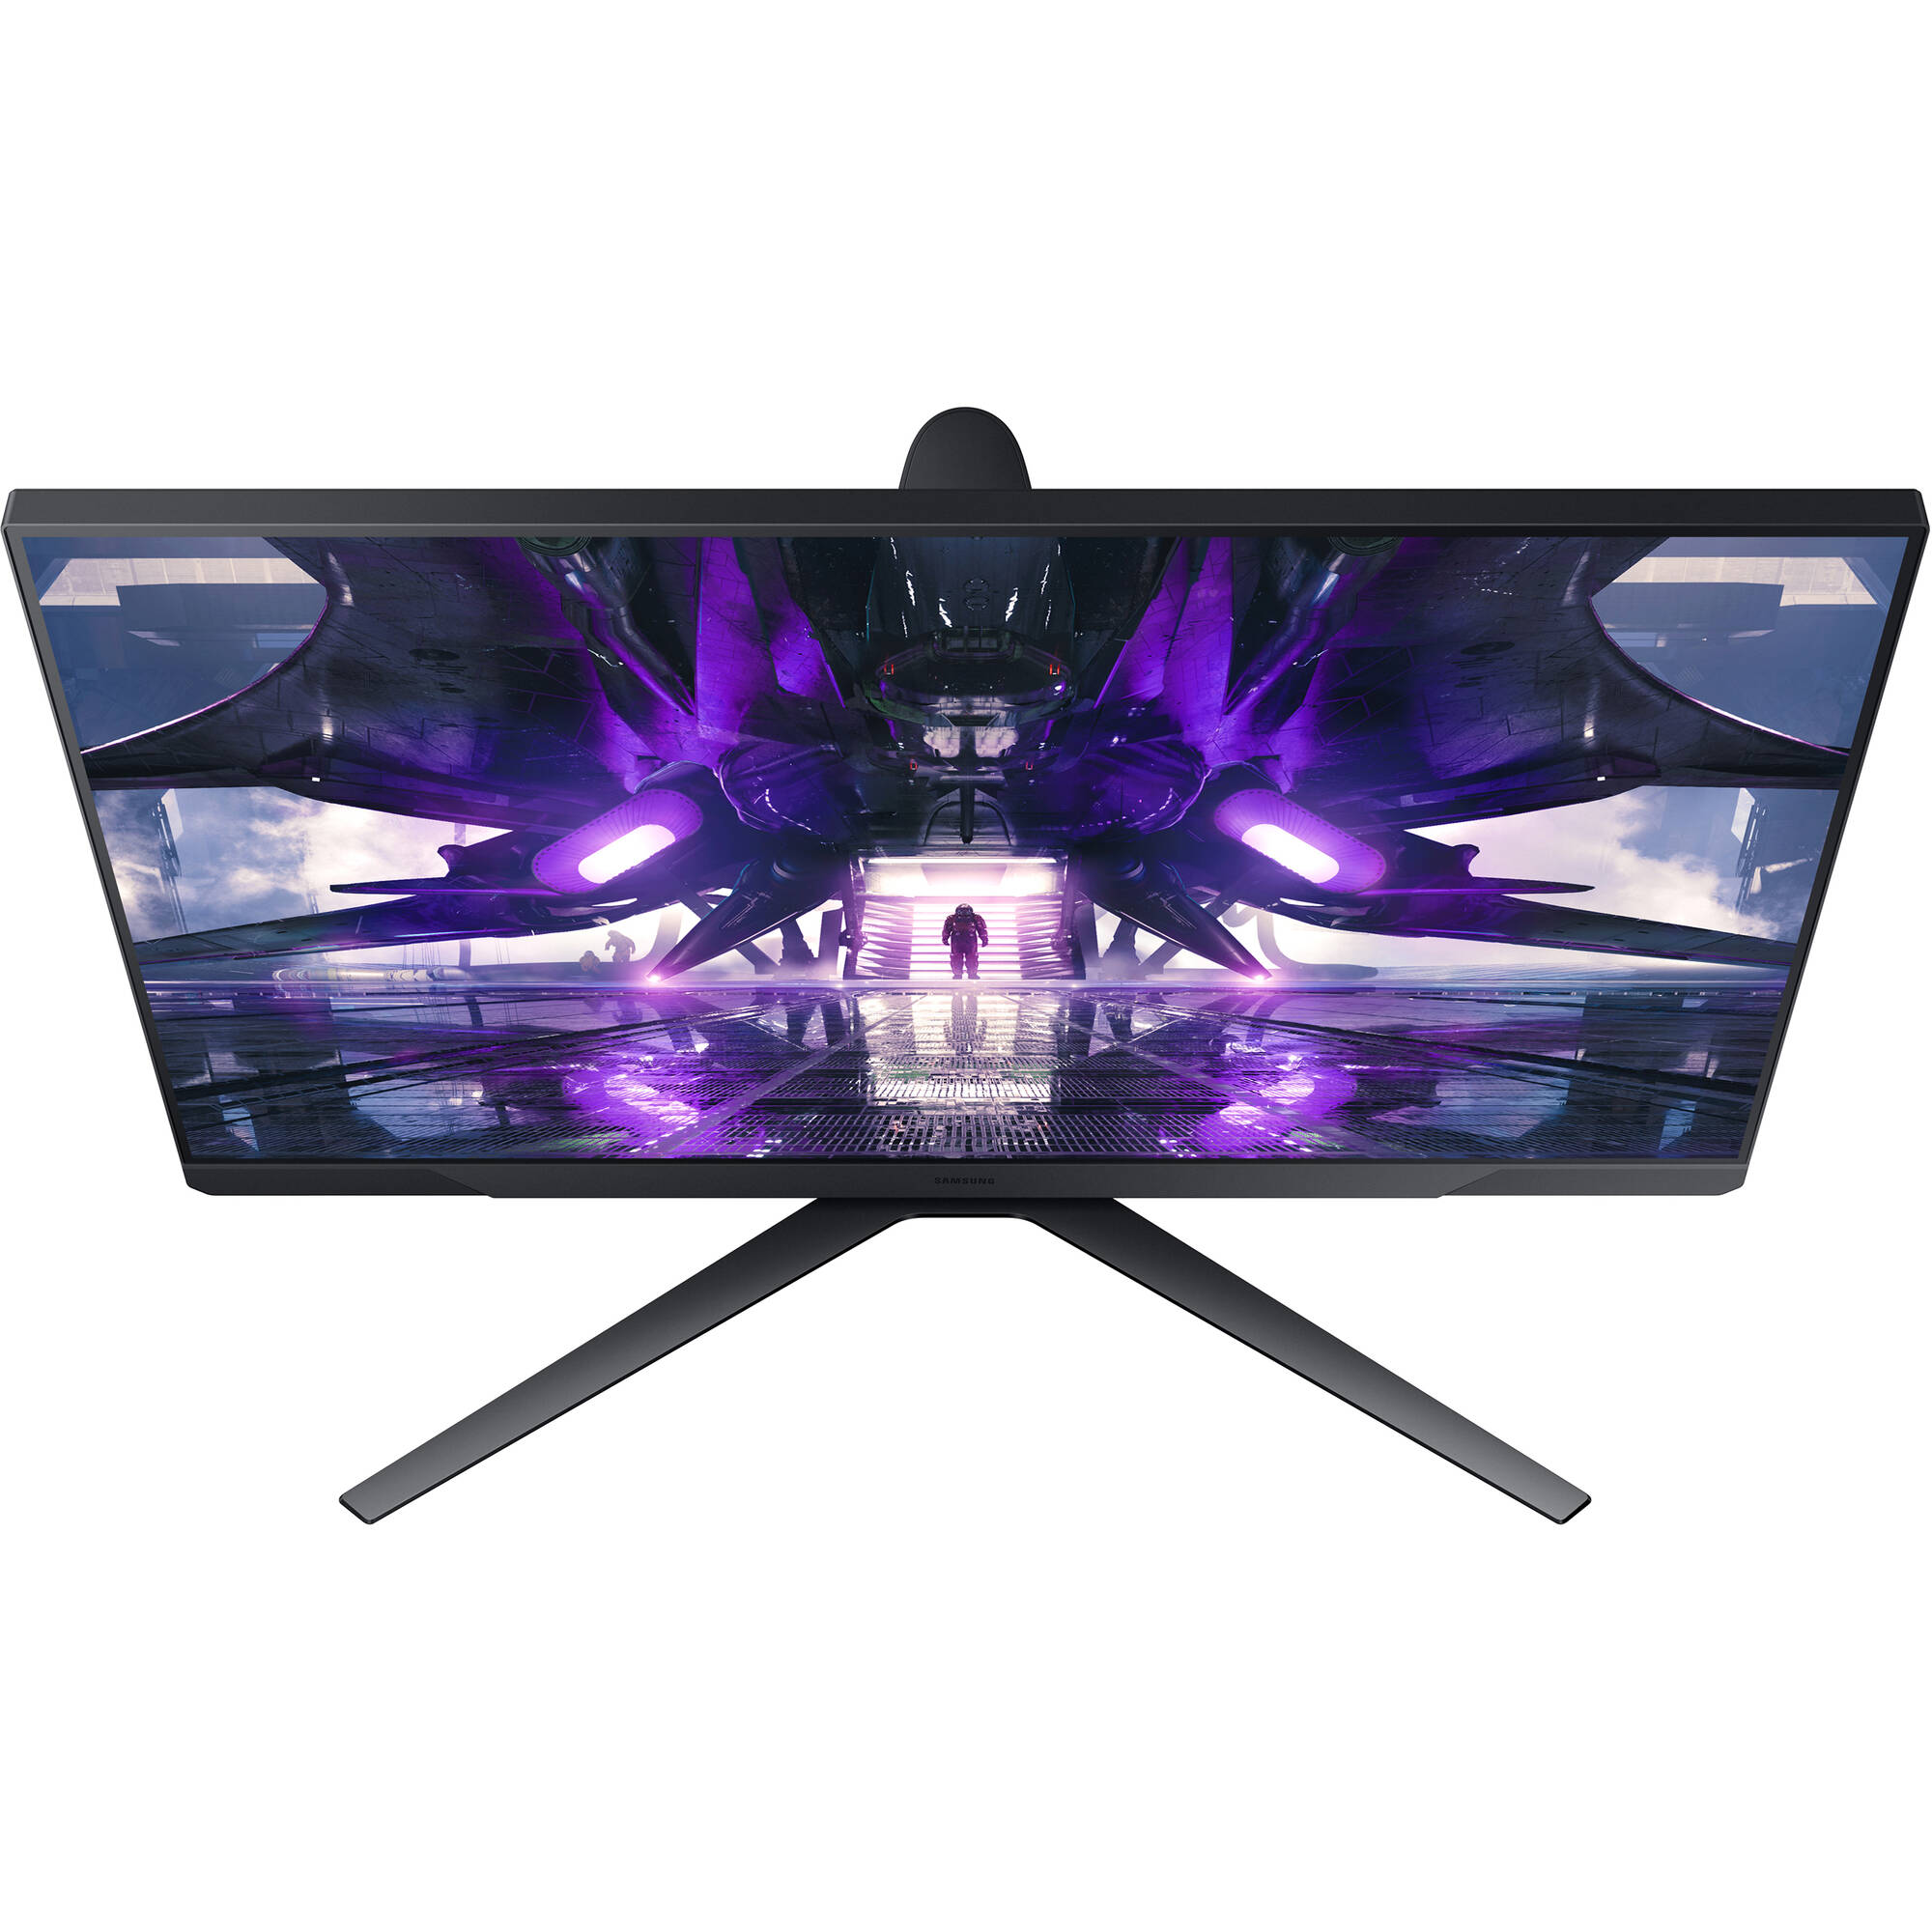 Samsung LS24AG302NNXZA-RB 24" 1920 x 1080 144Hz FHD Gaming Monitor - Certified Refurbished